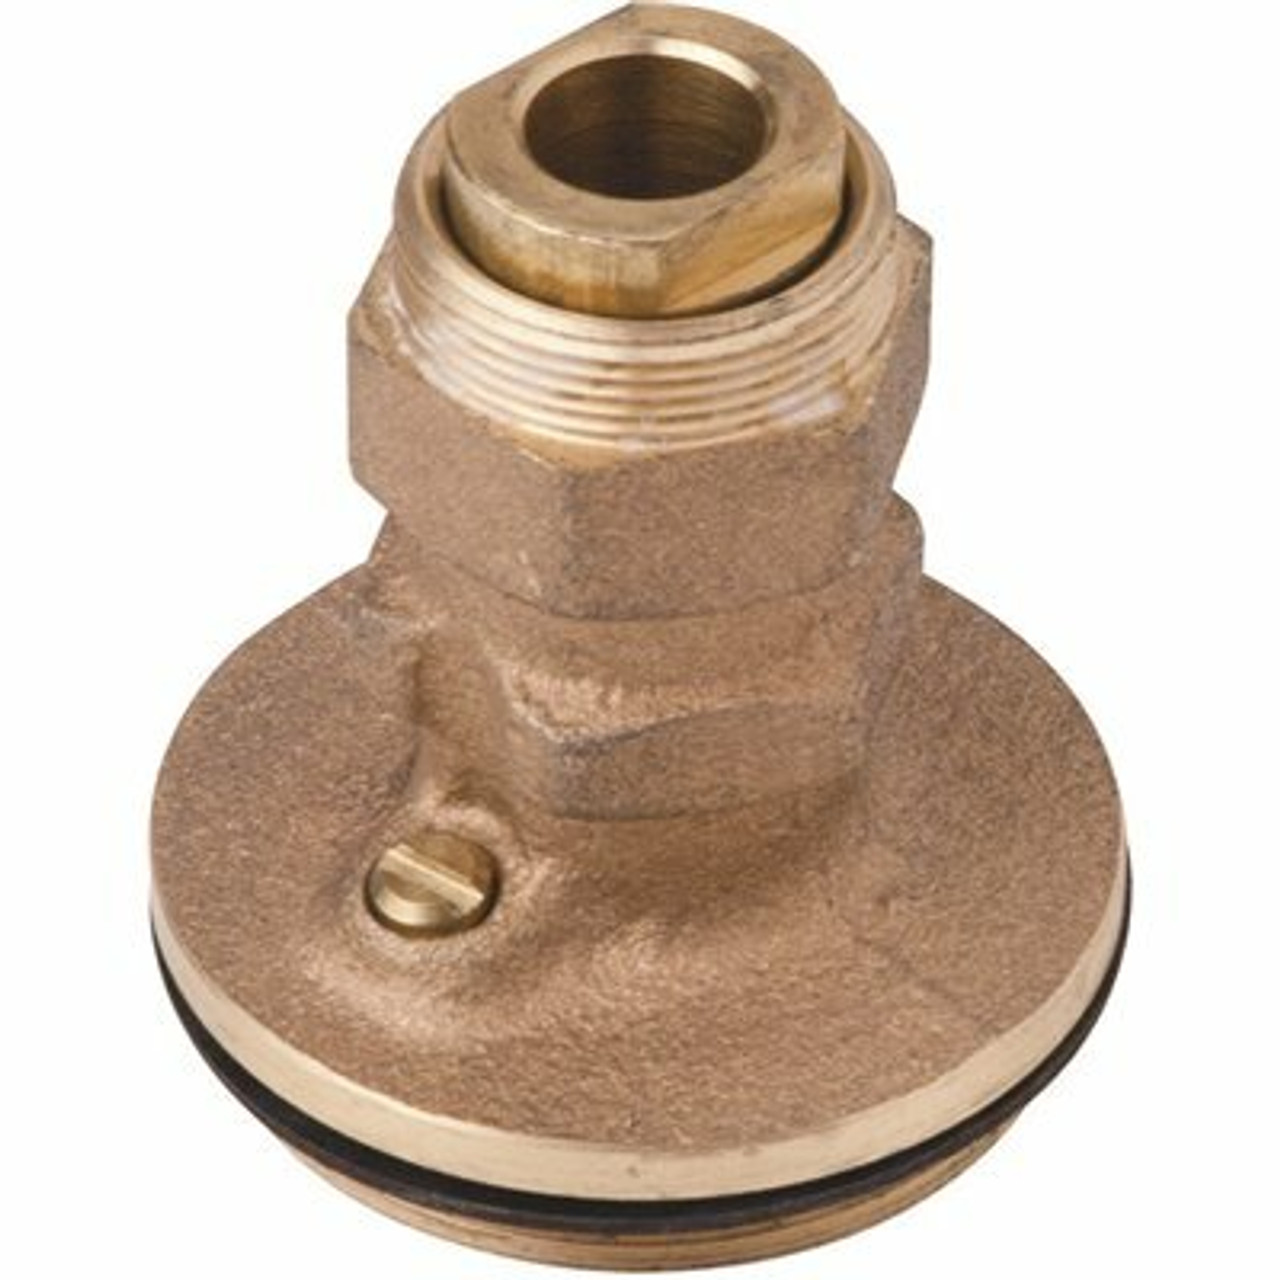 Symmons Safetymix 2 In. X 2.34 In. Valve Cap Replacement